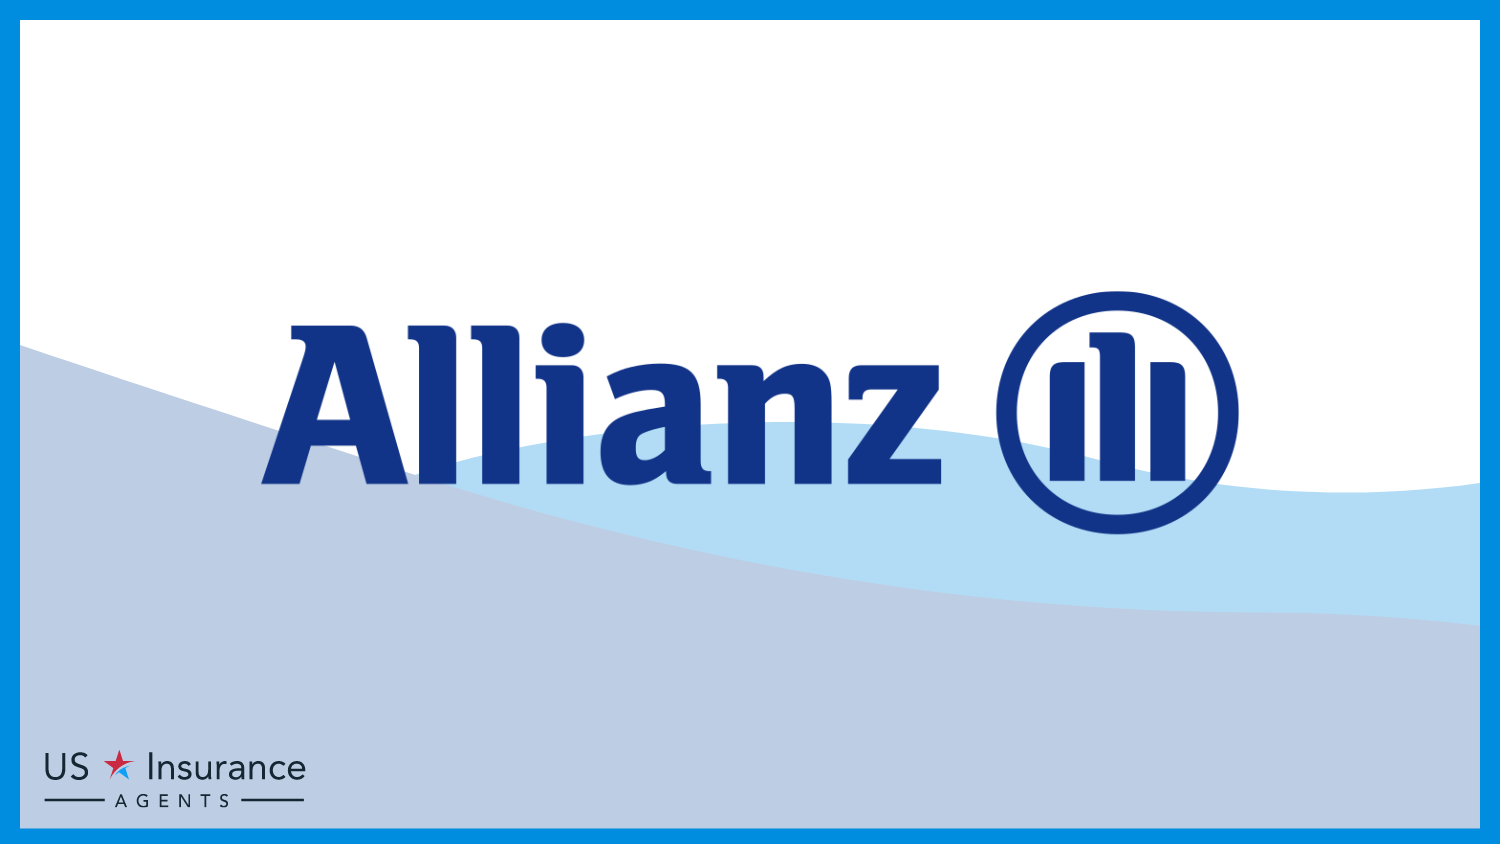 Allianz: Best Business Insurance for Oil and Gas Companies